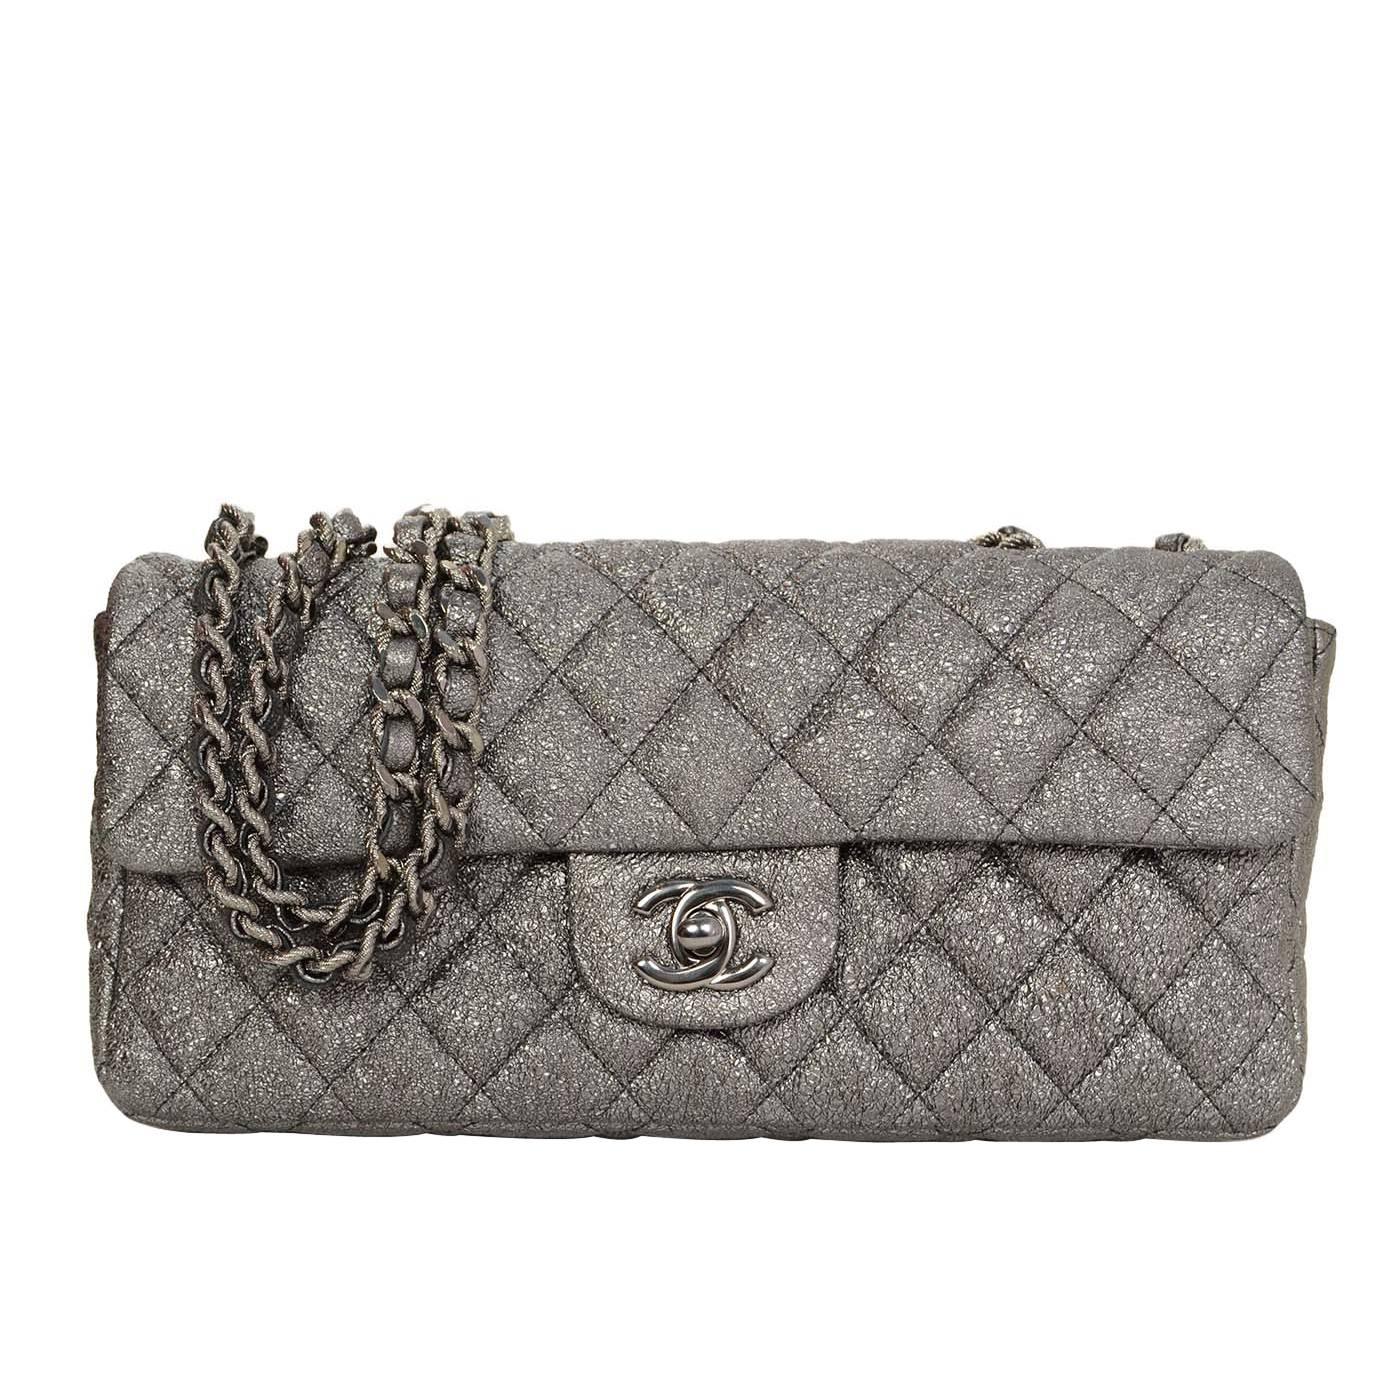 Chanel Silver Textured Quilted East/West Flap Bag